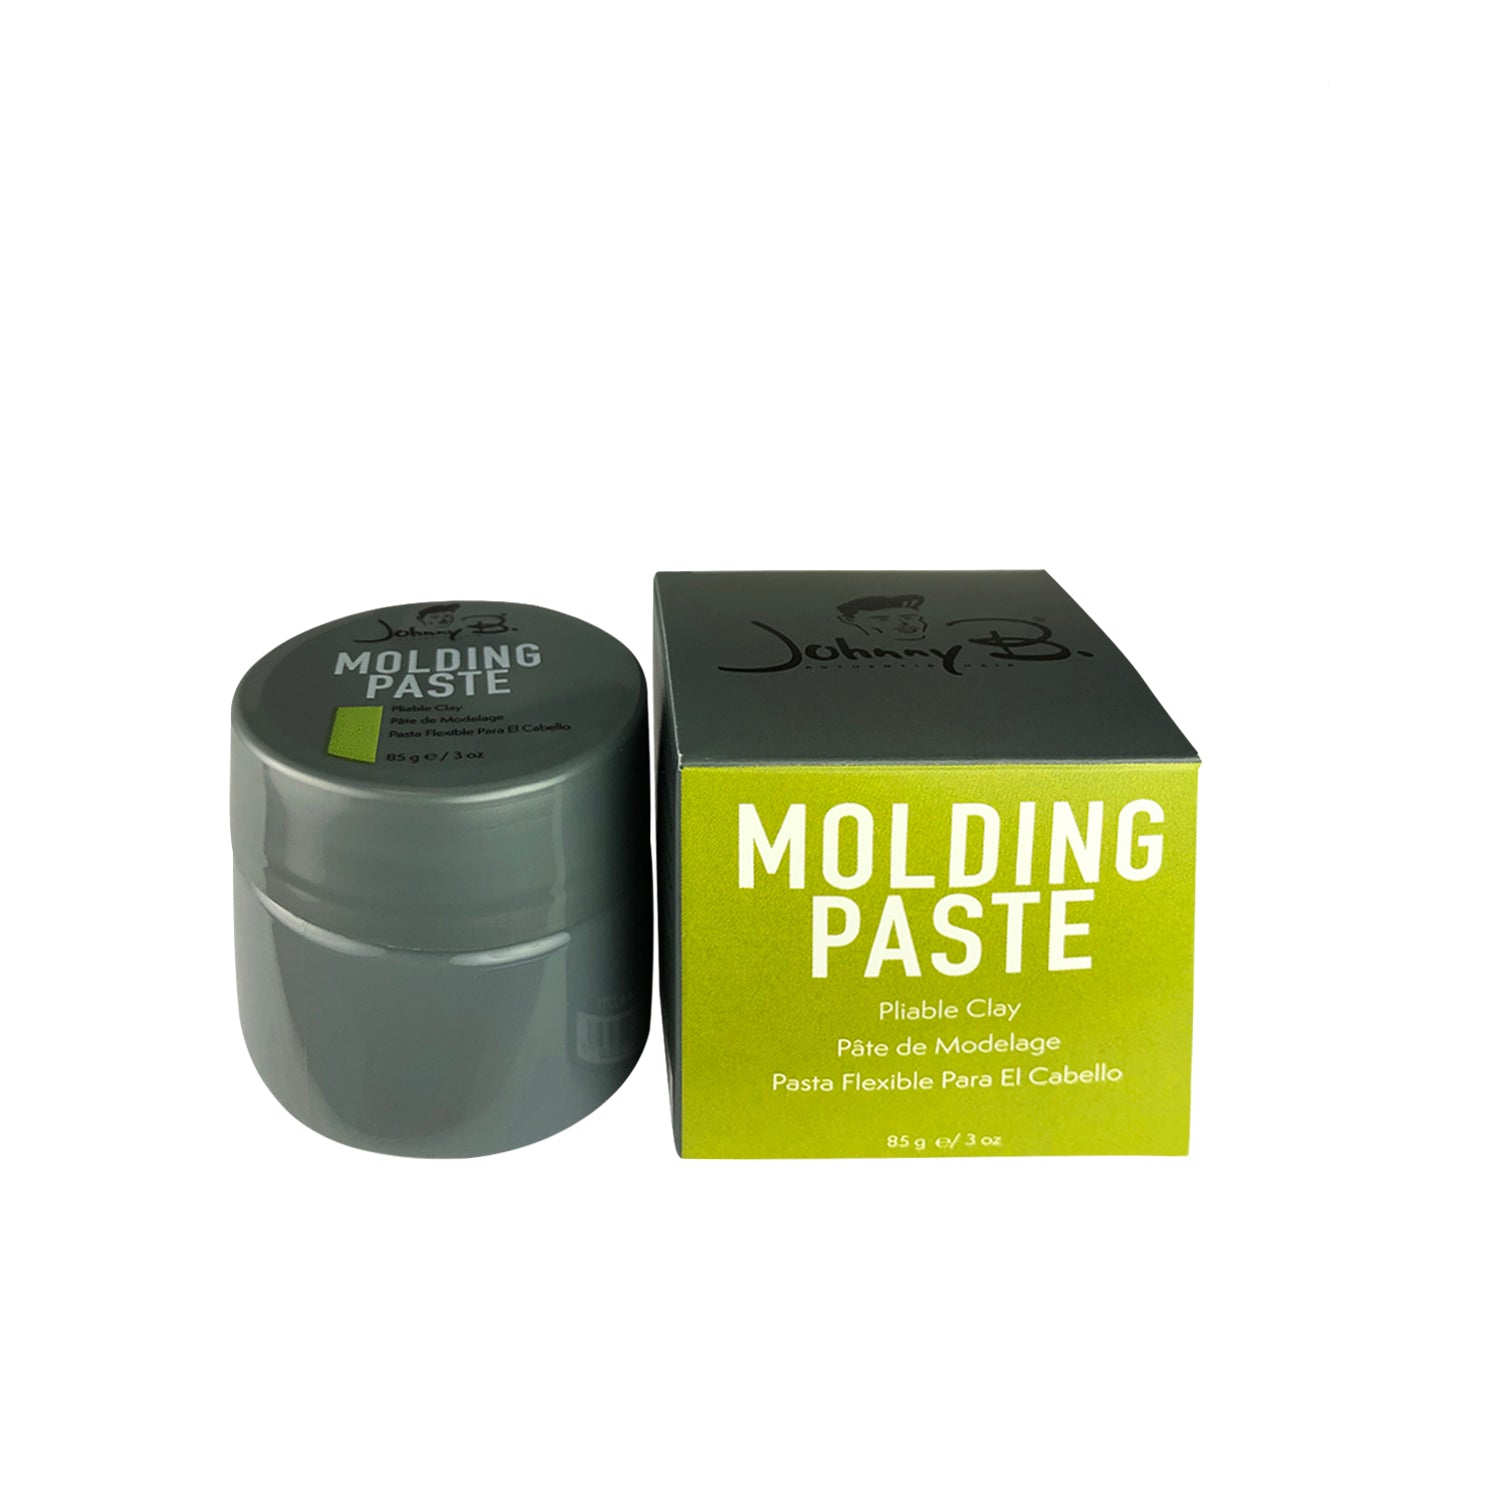 Johnny B. Molding Paste Pliable Clay